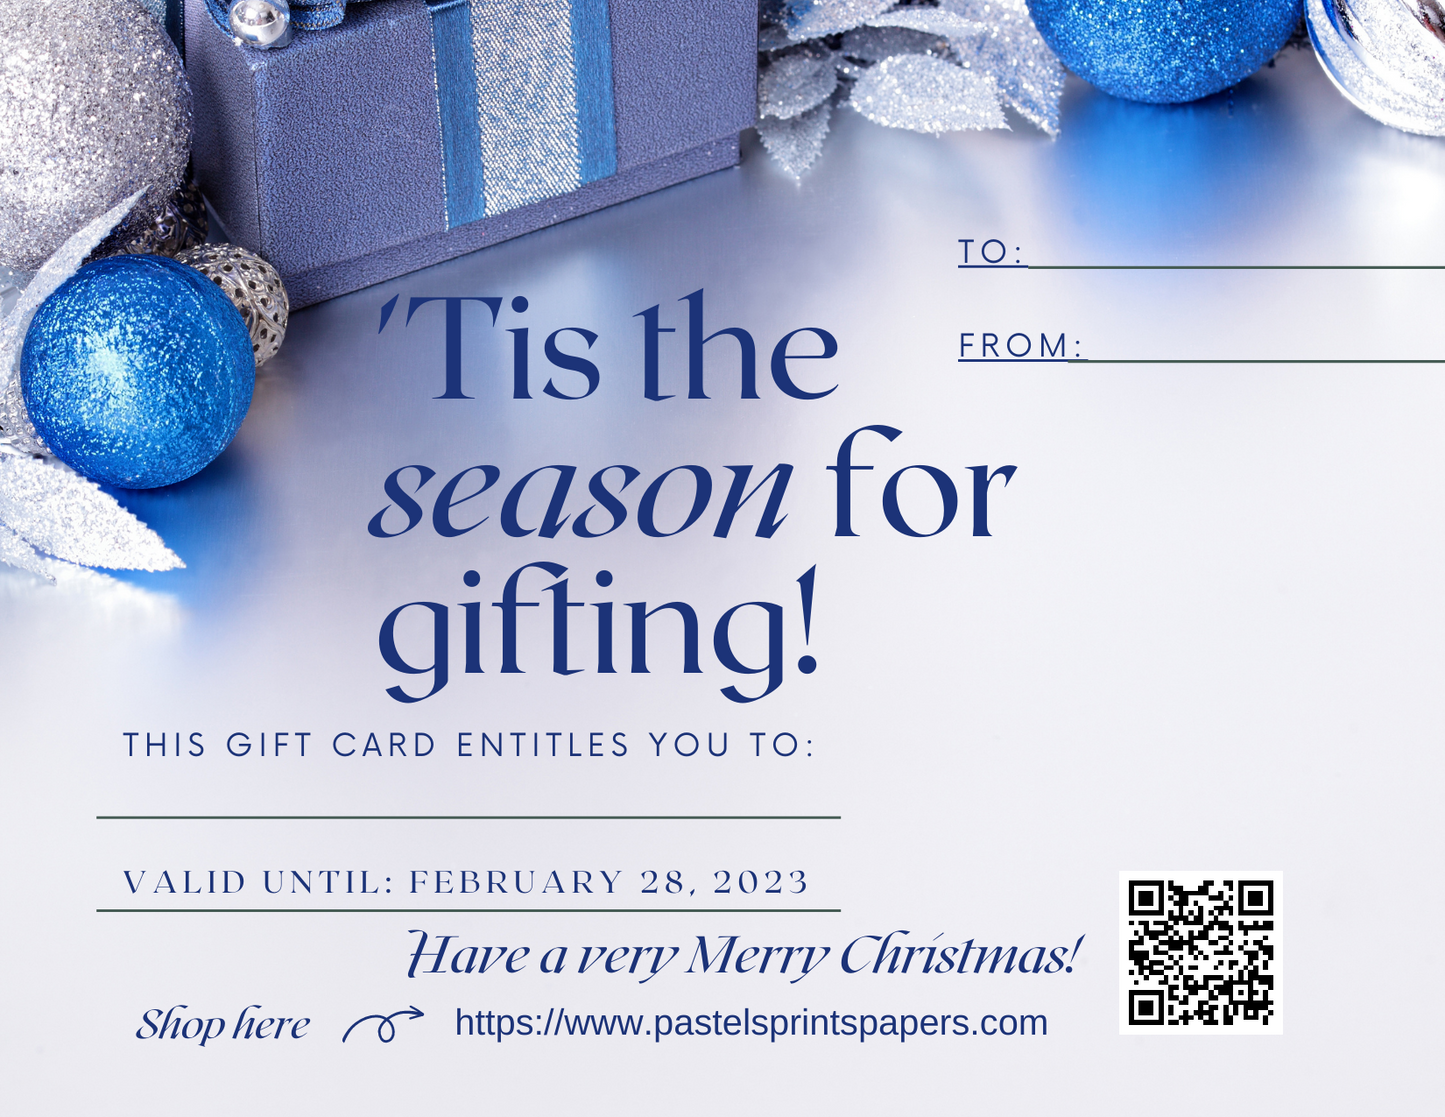 Gifts & Accessories - Gift Certificate